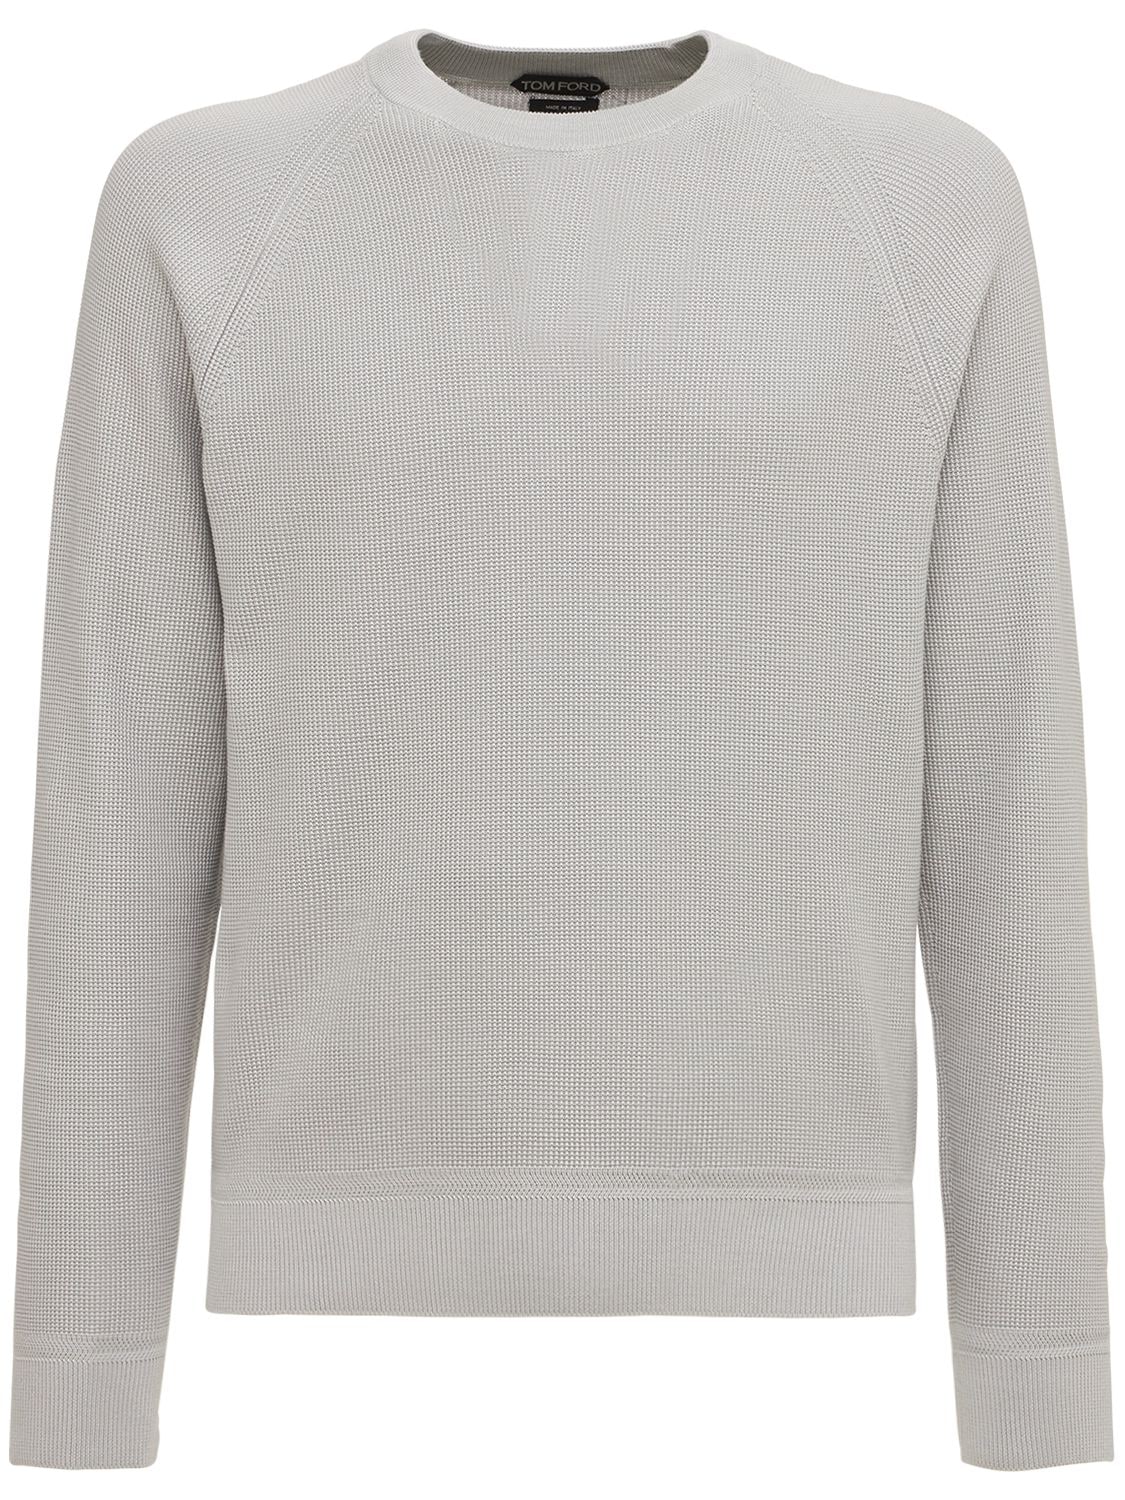 Tom Ford Cotton & Silk Knit Sweater In Light Brown | ModeSens